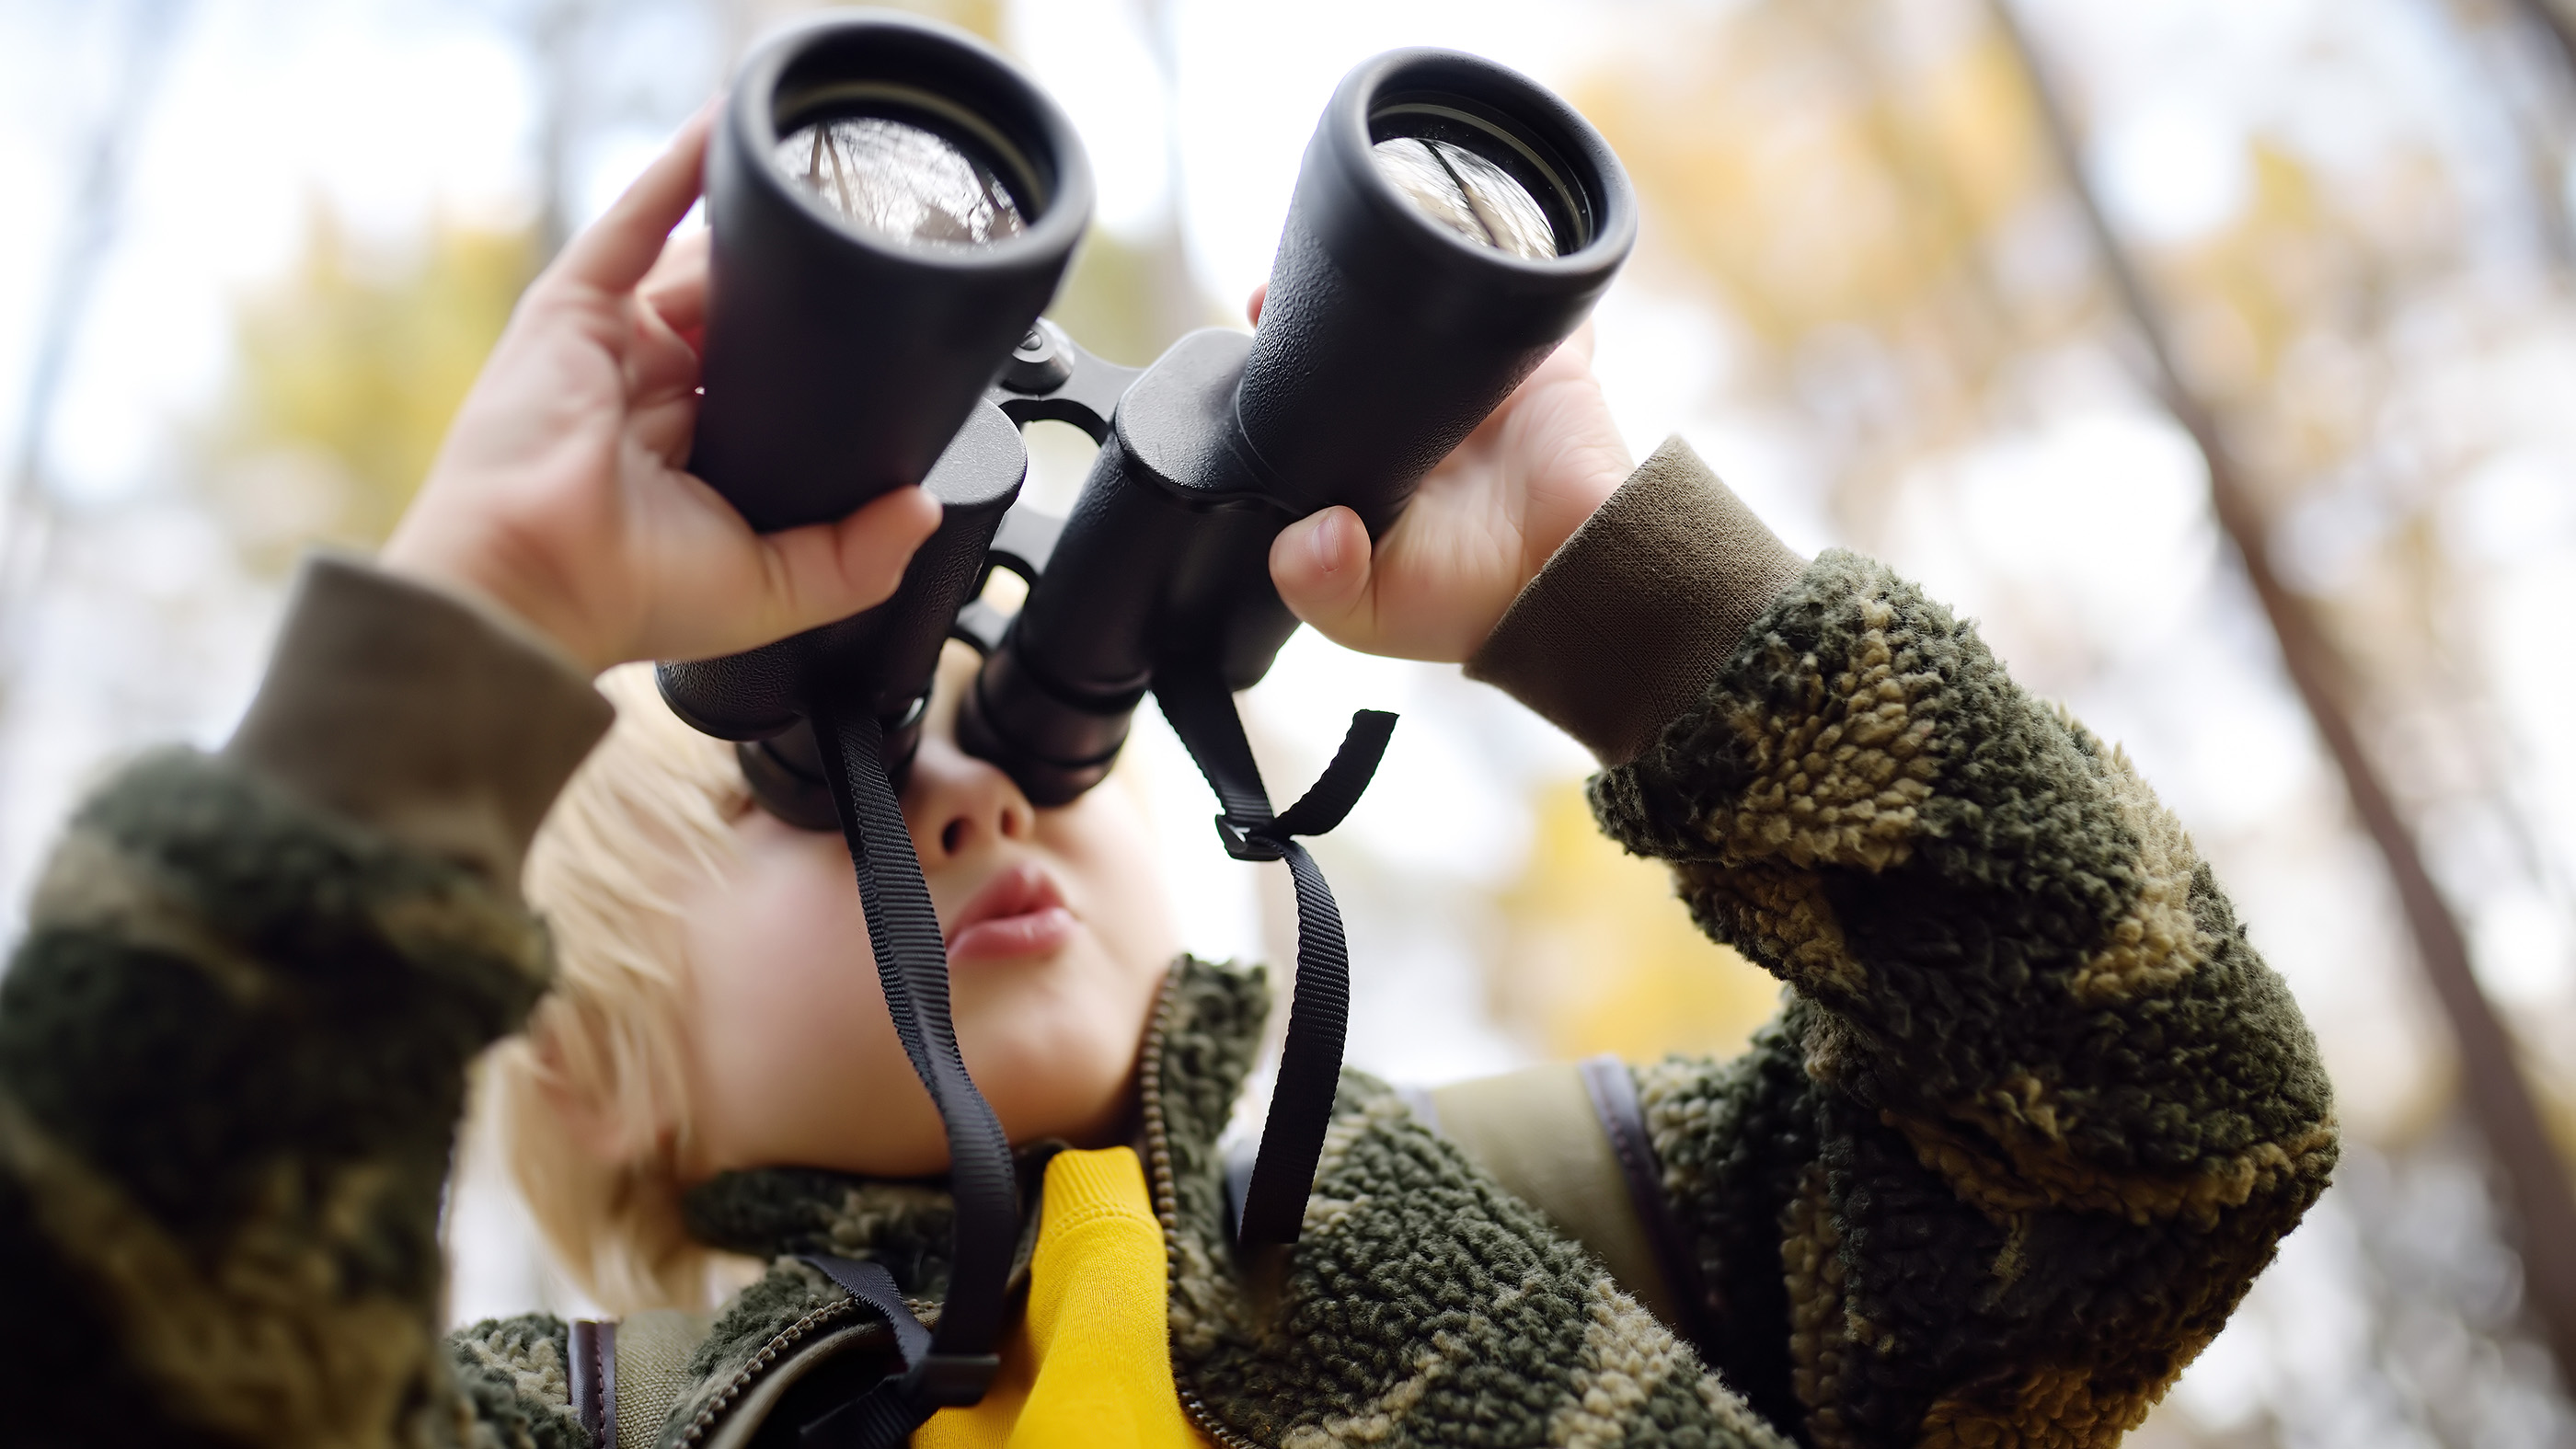 Bird Watching Outdoor Play Pink Mini Binoculars for Kids,10x25 Kids Compact Binoculars with Neck Strap for 3-15 Years Old Boys Girls Best Toy Gift for Spy Camping 